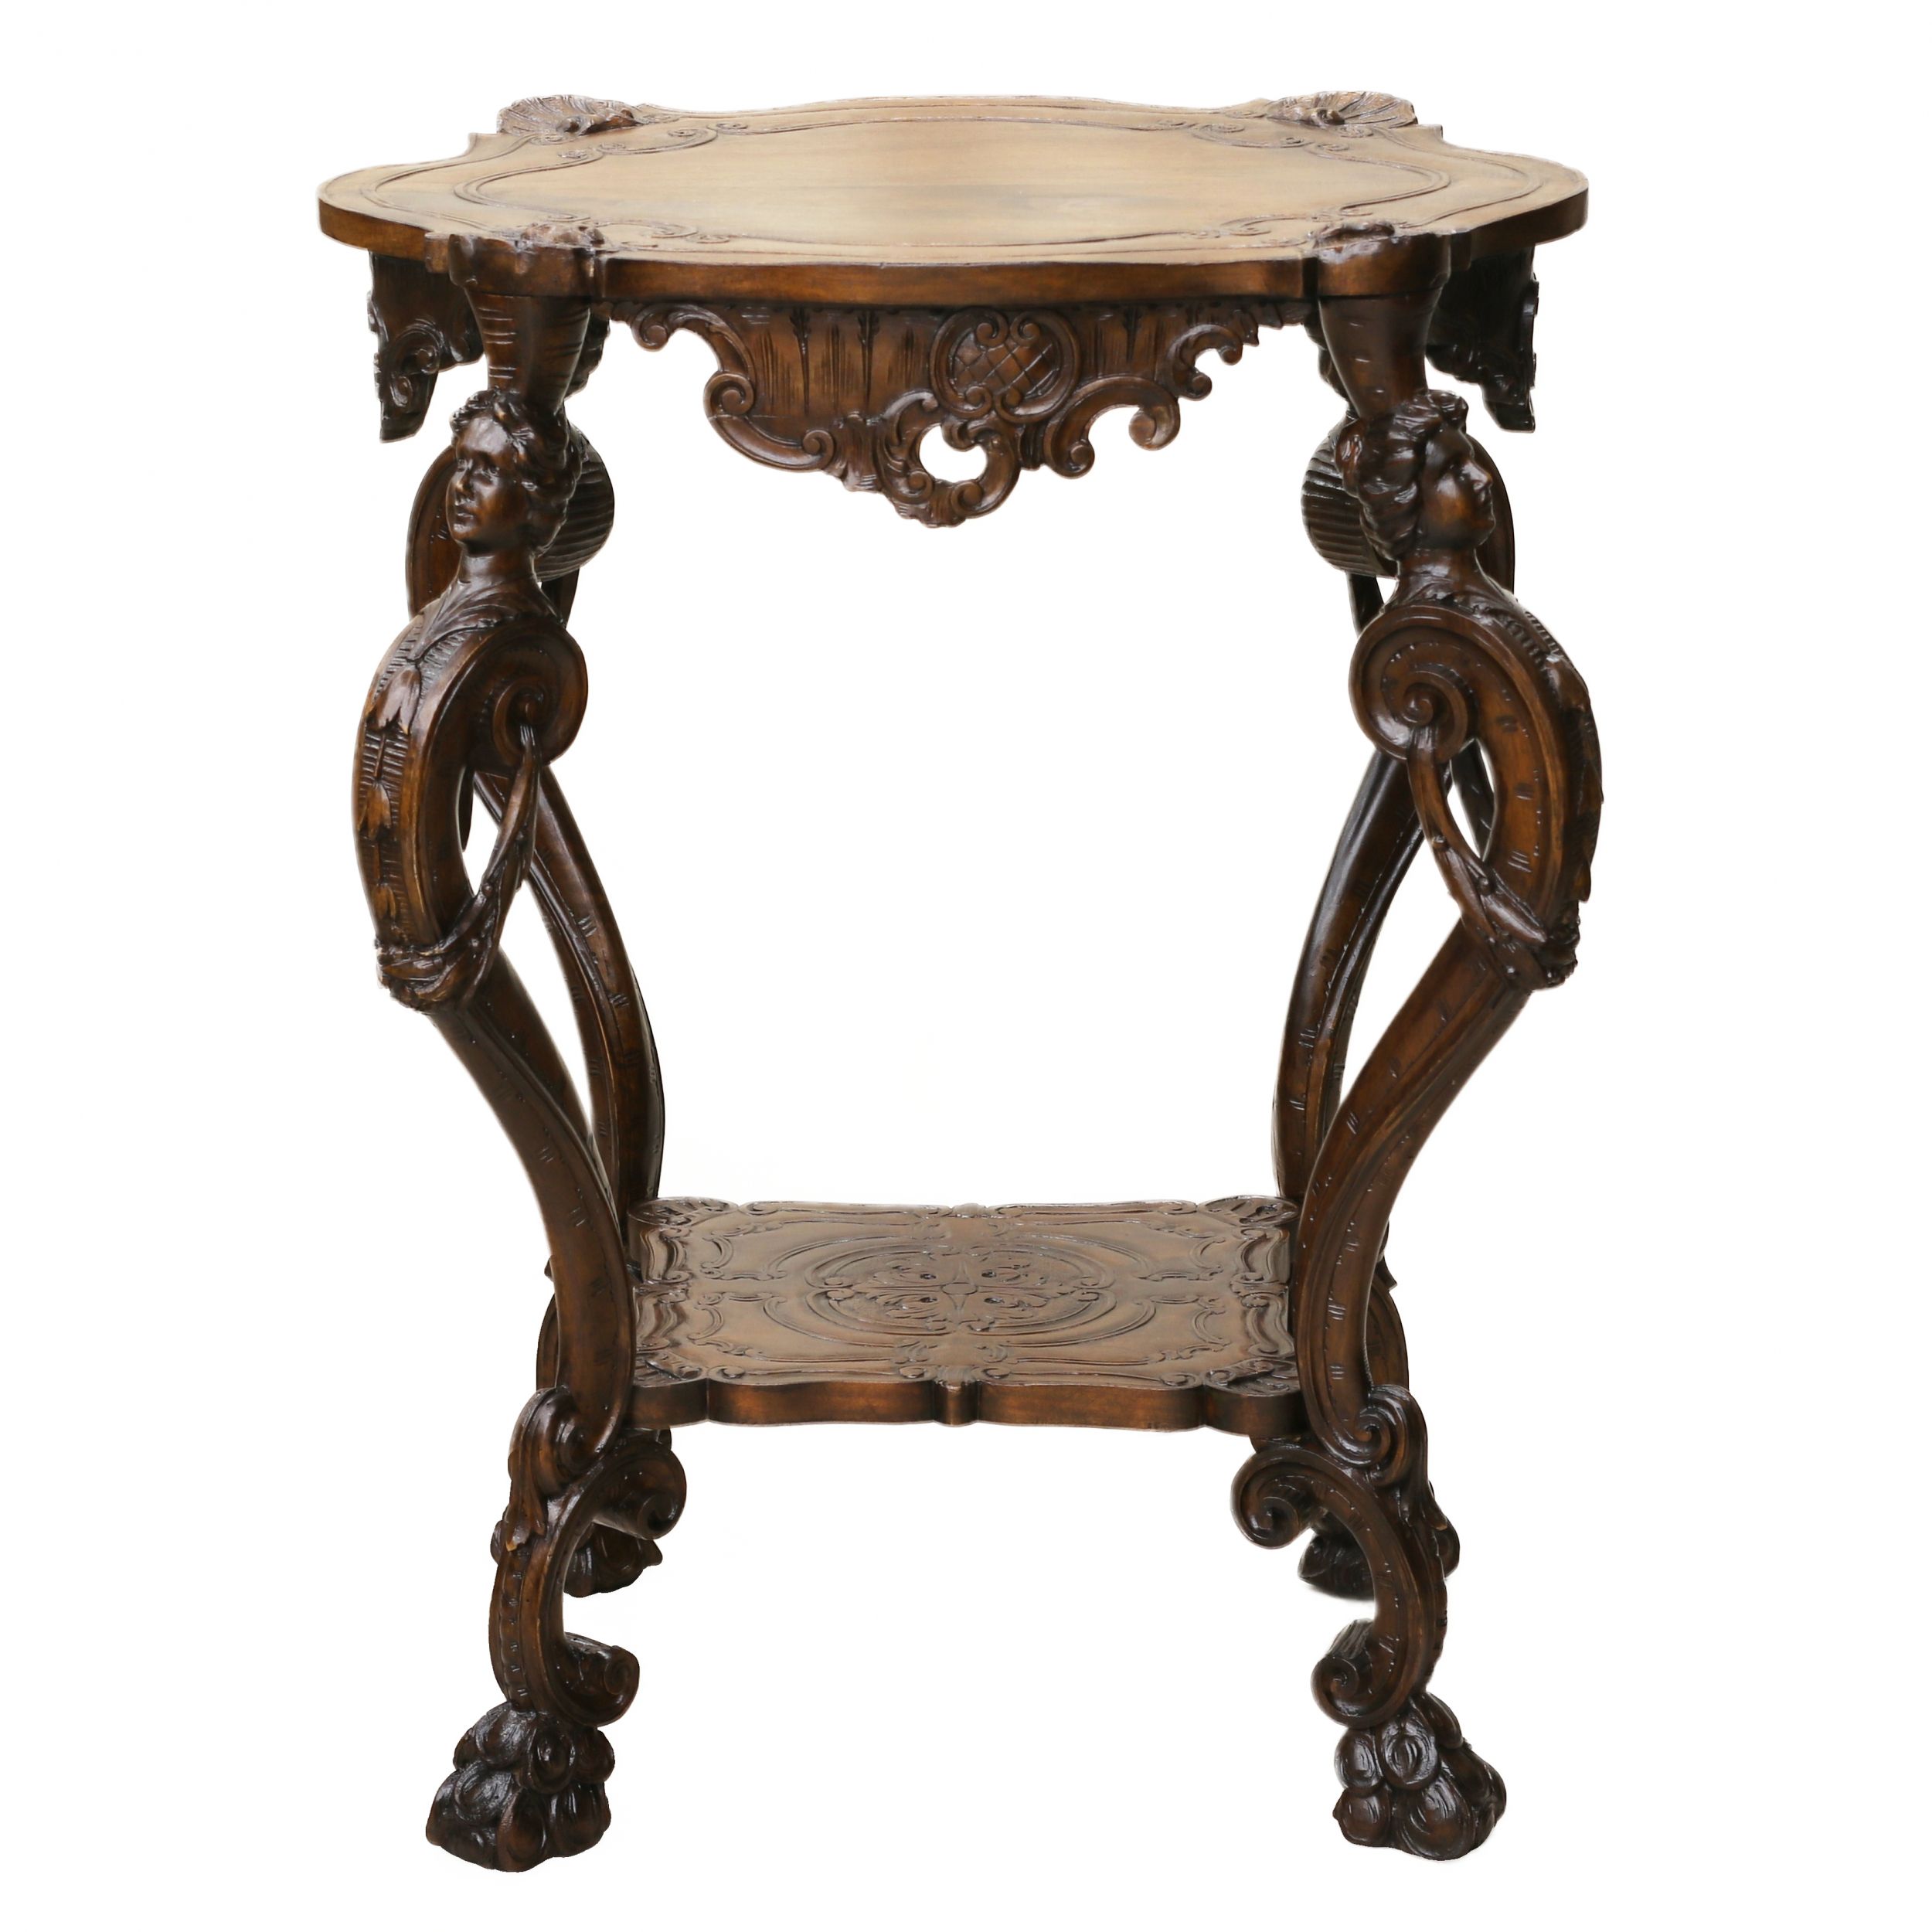 Carved wooden table in neo-Rococo style from the turn of the 19th century. - Image 2 of 7